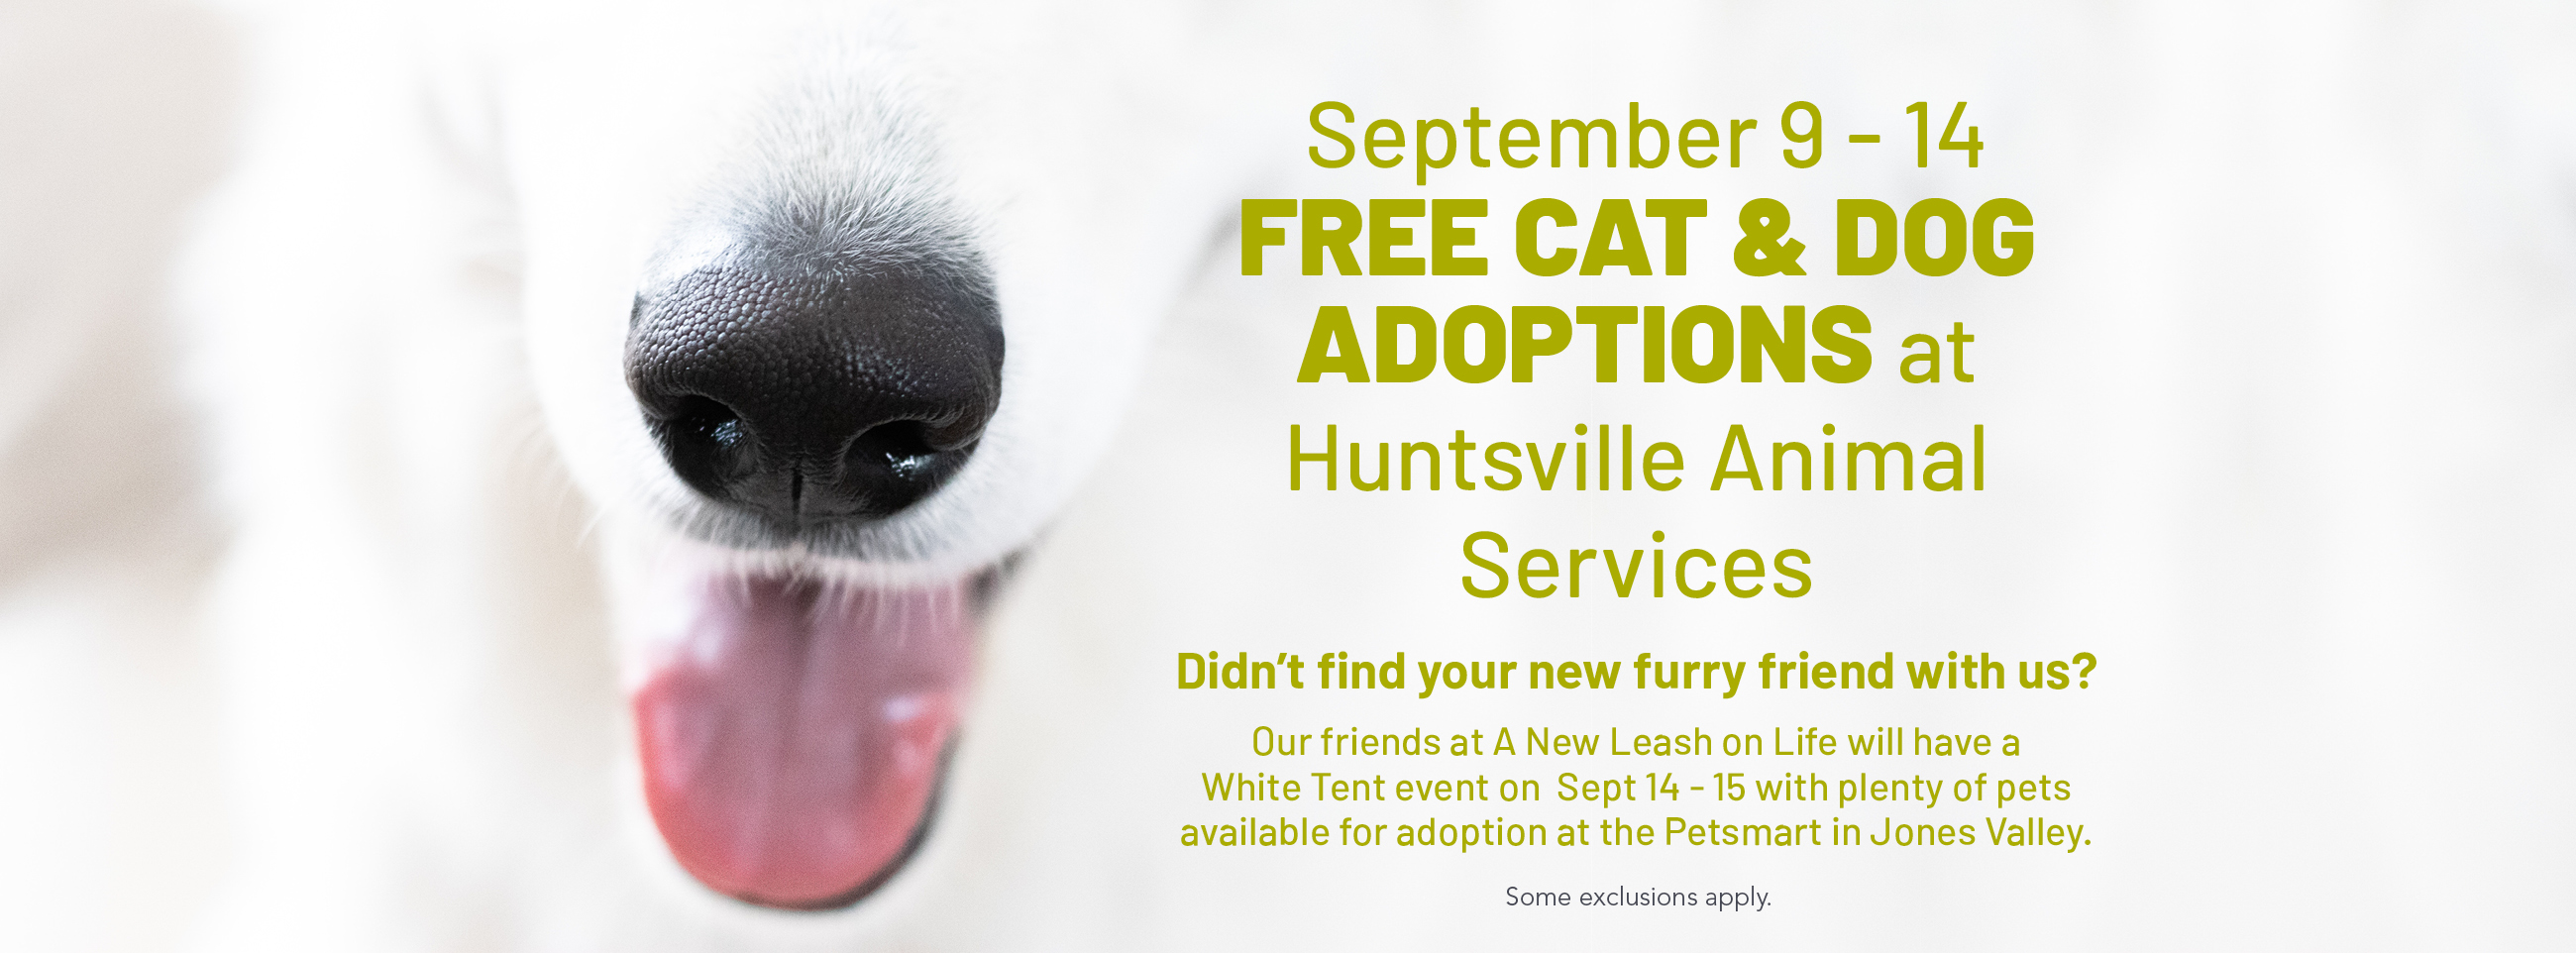 Fee-Waived Pet Adoptions At Huntsville Animal Services - City of Huntsville